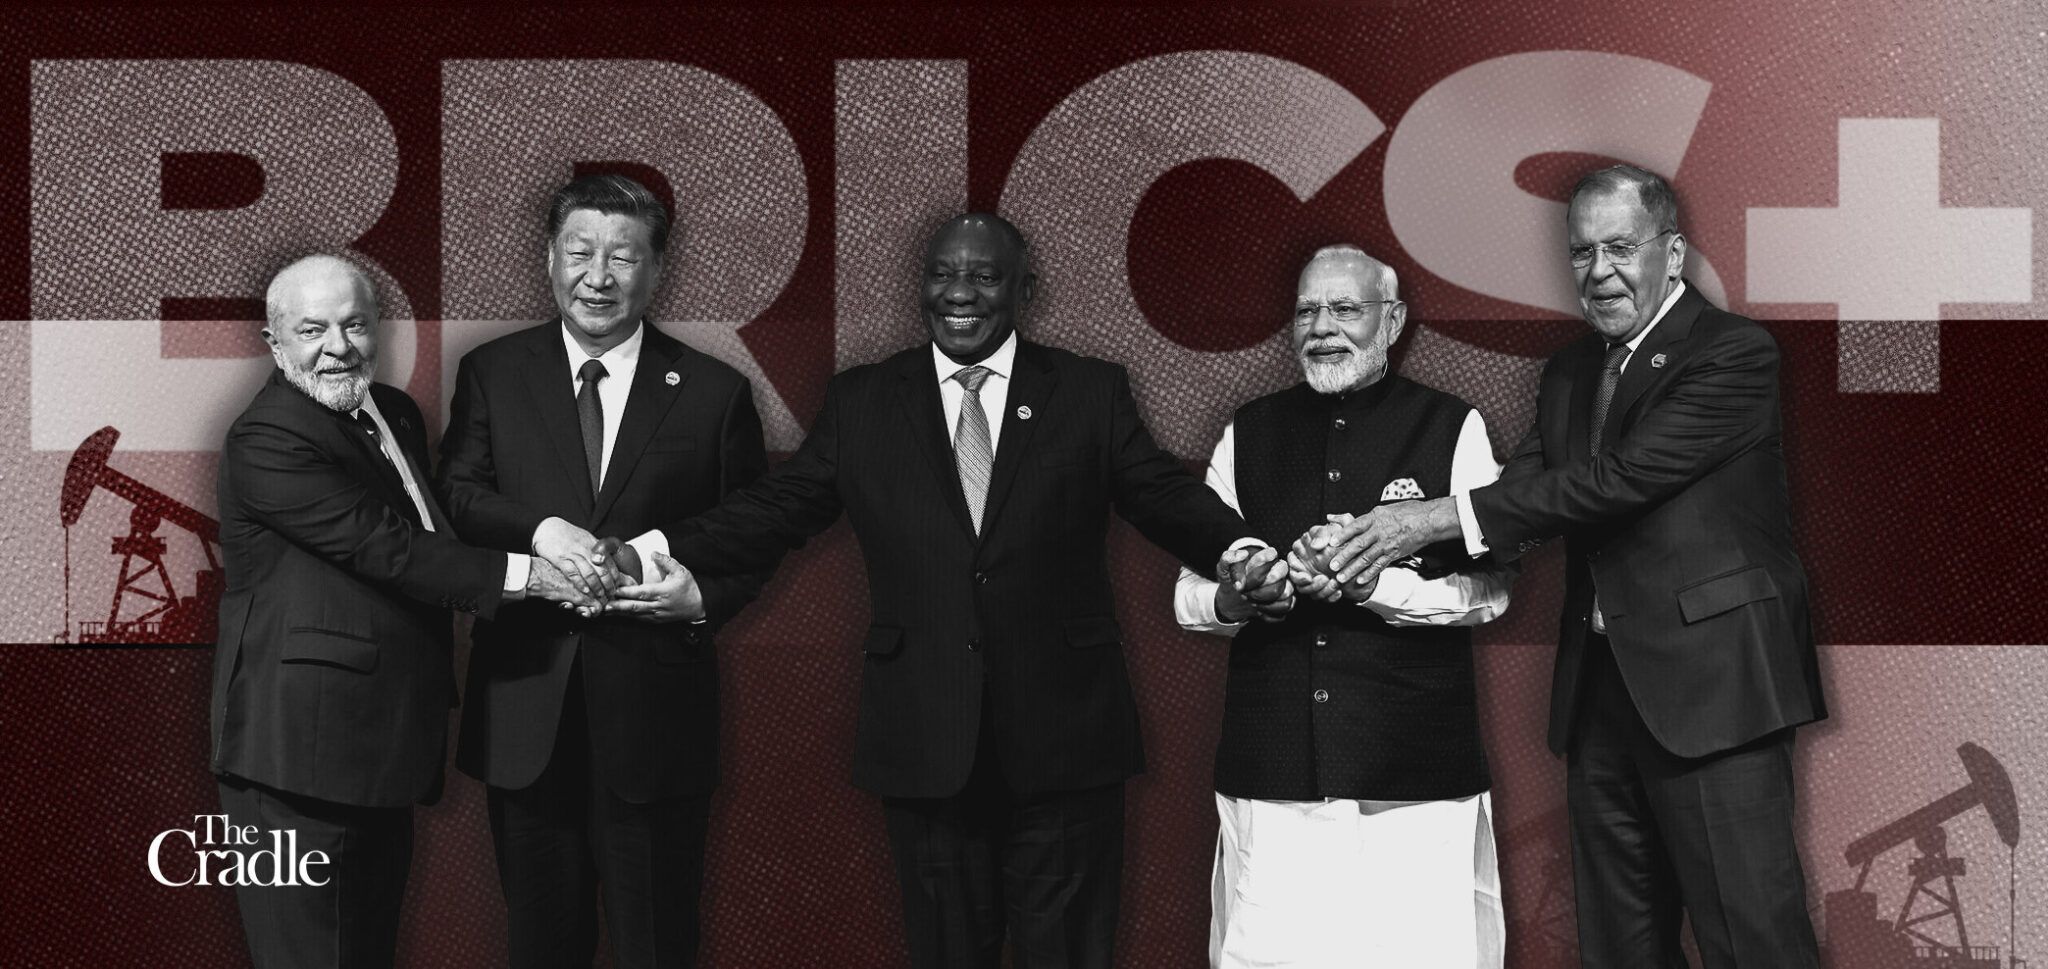 From left to right: President Luiz Inacio Lula da Silva of Brazil; Chinese President Xi Jinping; South African President Cyril Ramaphosa; Prime Minister Narendra Modi of India; and Russian Foreign Minister Sergei Lavrov. Photo: AFP.